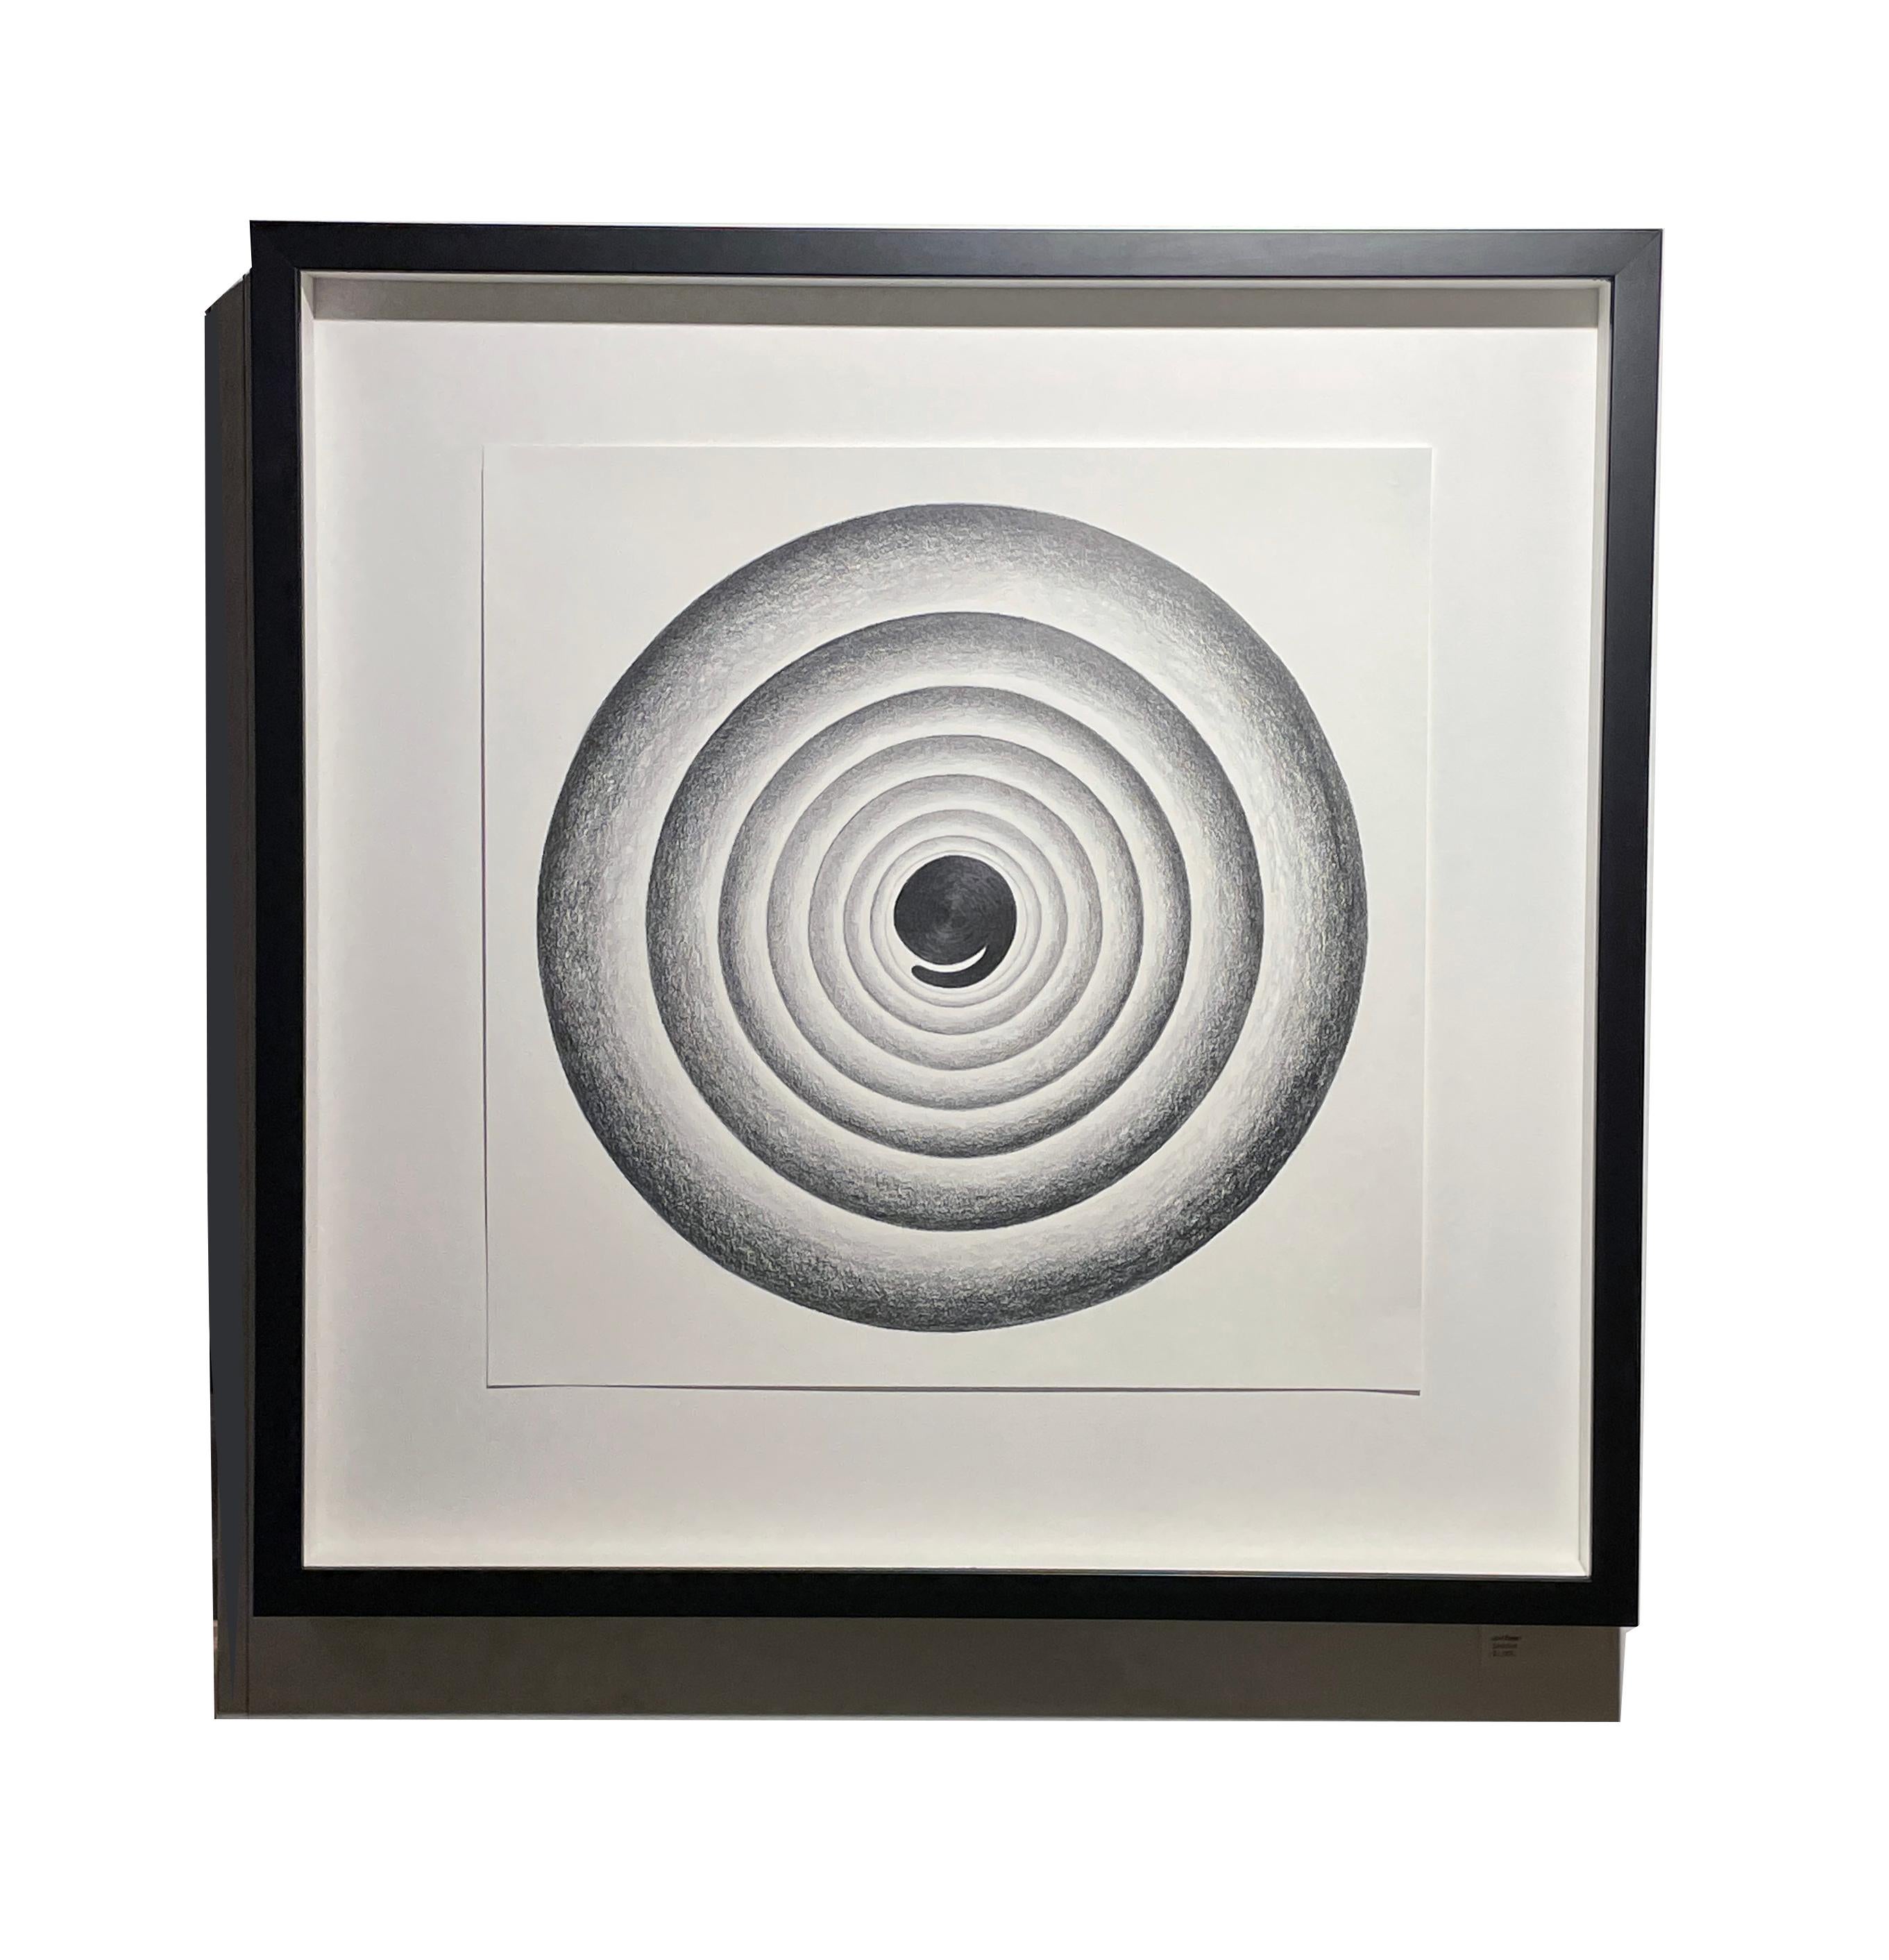 Arena, Geometric Circular Abstraction, Graphite on Paper, Framed - Art by Joe Royer